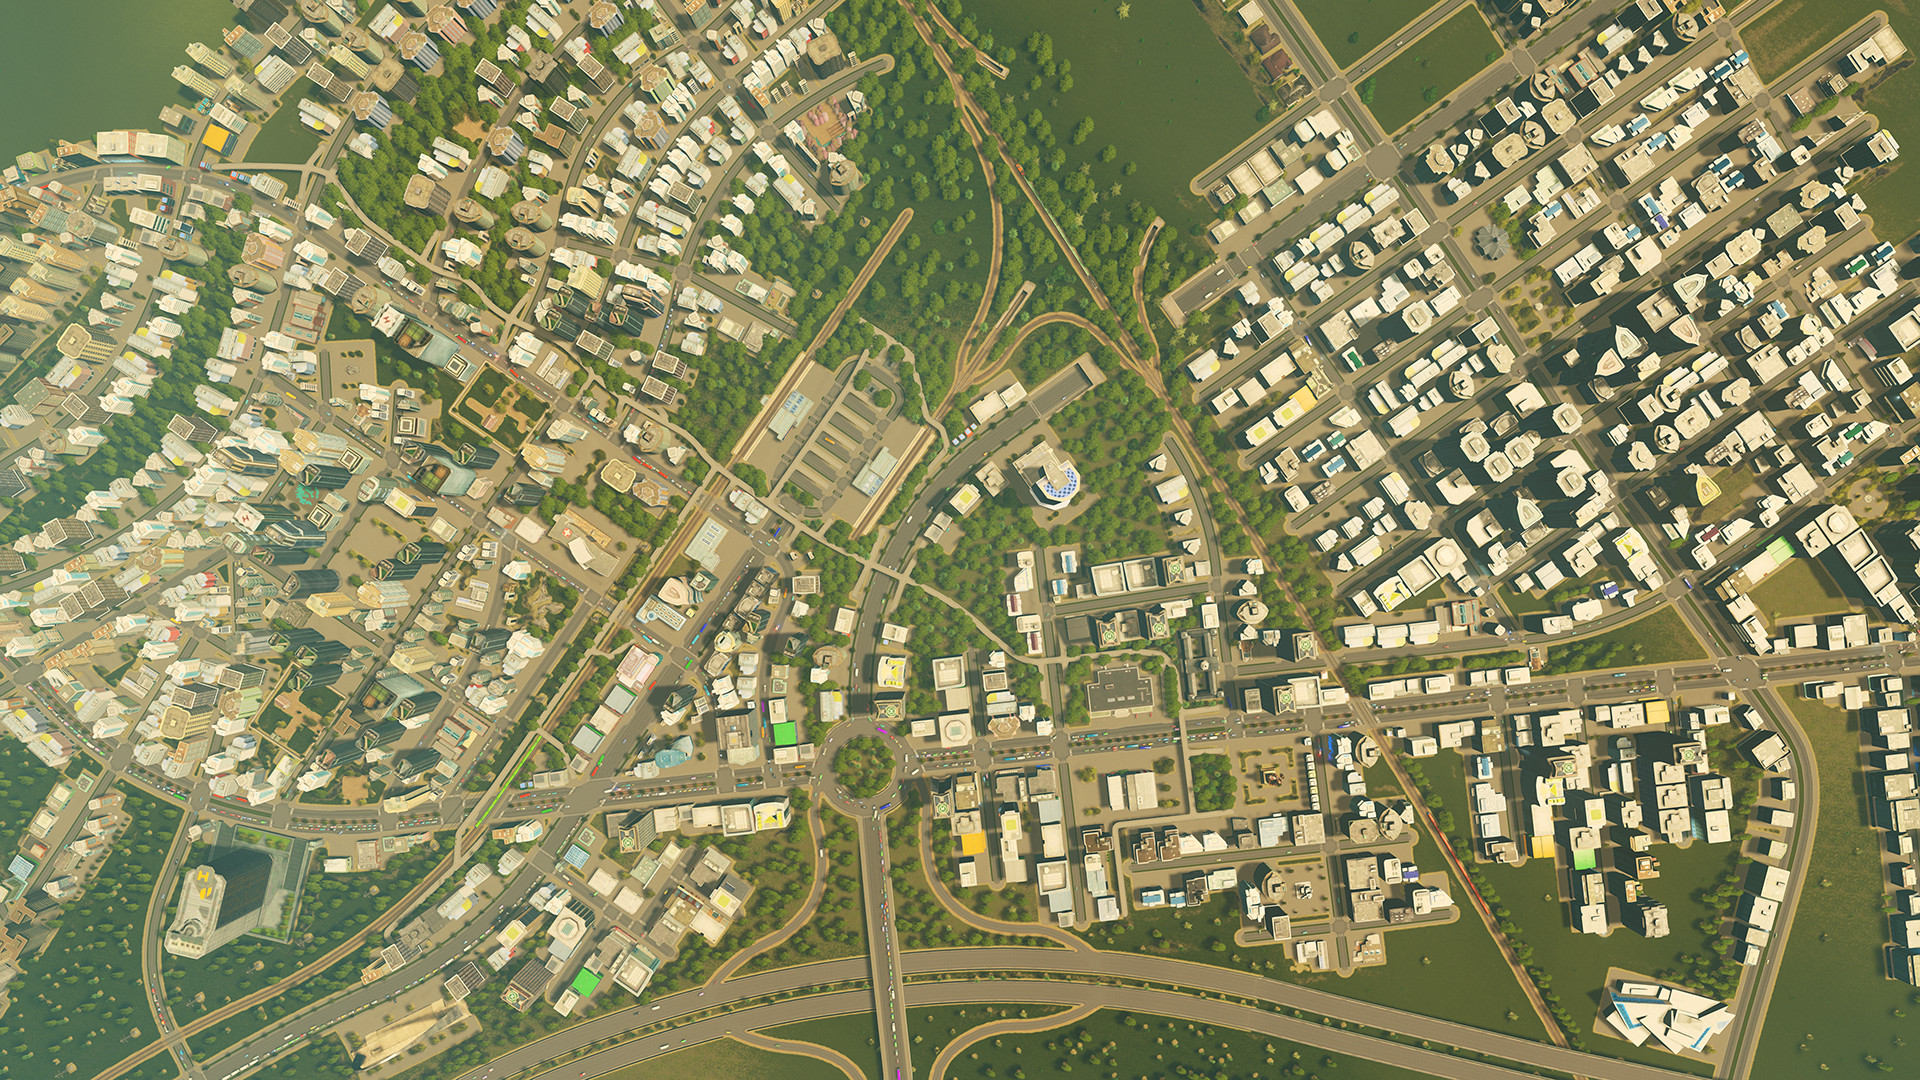 how to install steam mods locally for cities skylines offline